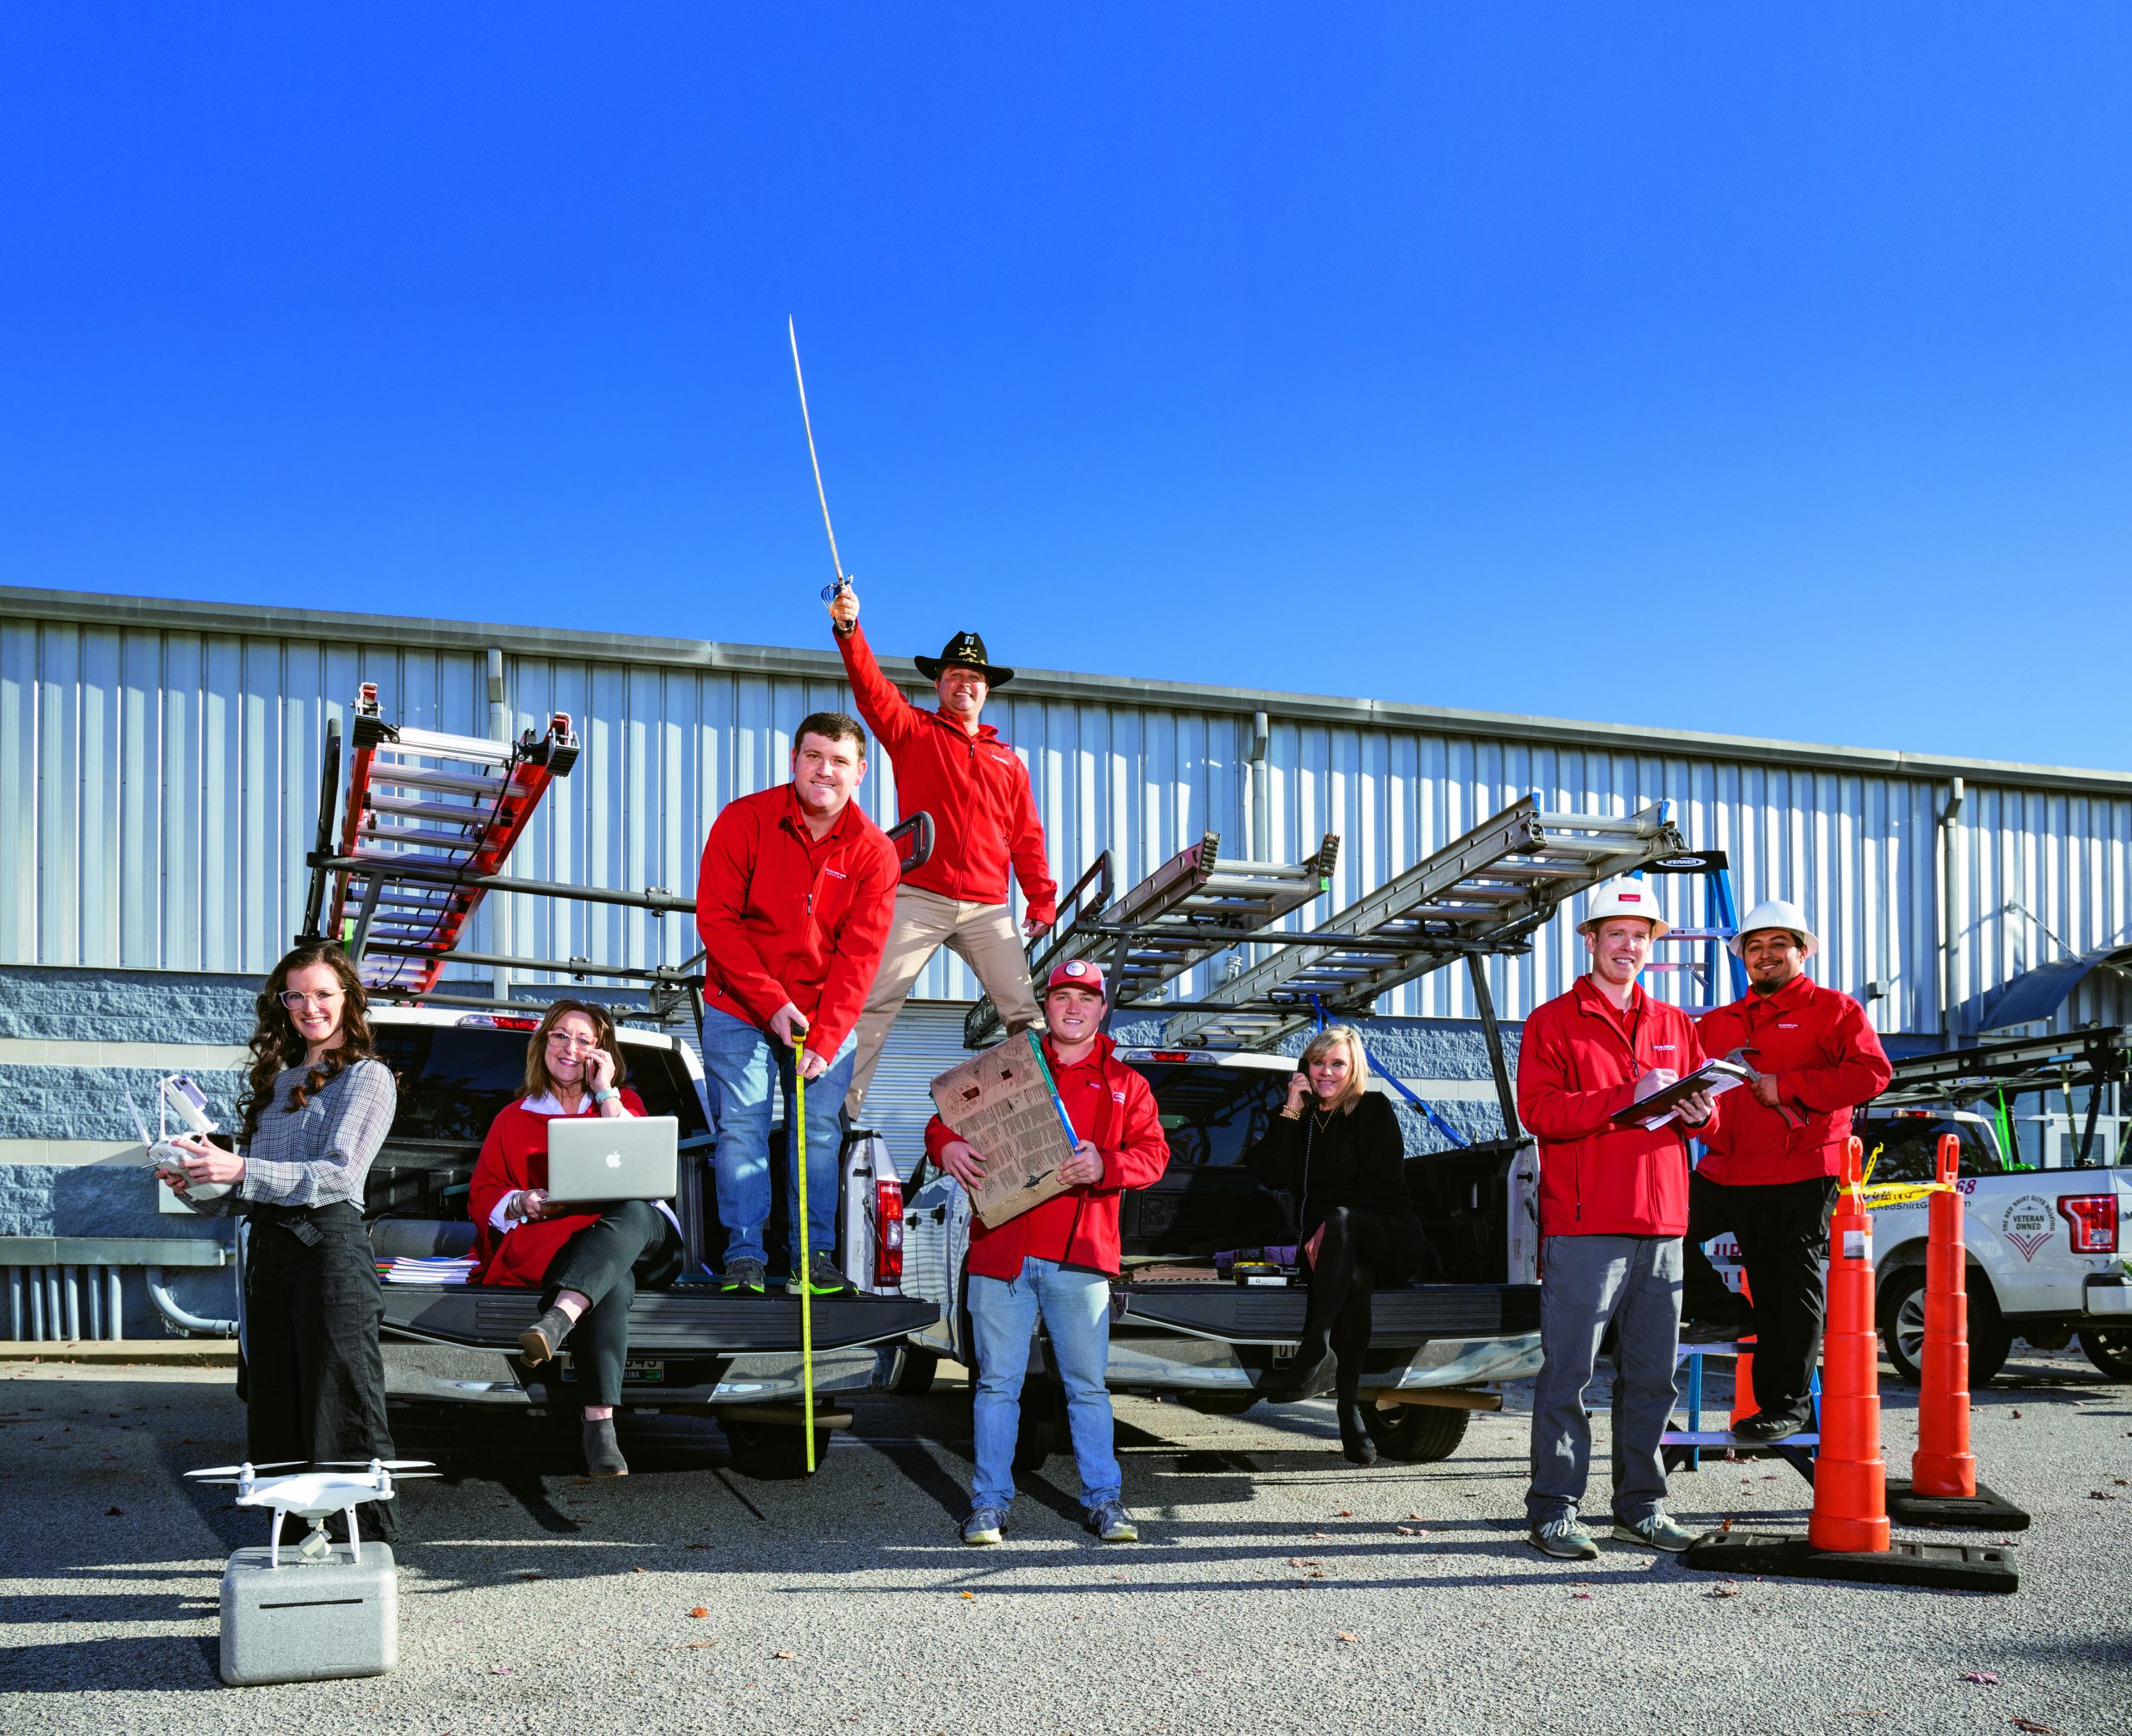 Congratulations to The Red Shirt Guys Roofing for winning Best Roofing Company. They will meet all of your needs with great enthusiasm, with President Tim Mahoney leading the brigade! Heather Woolard, Annie Fowler, Kenny Ard, Tim Mahoney, Tucker Roche, Jane Seegars, Jonathan Hardin, Roy Gaspar.